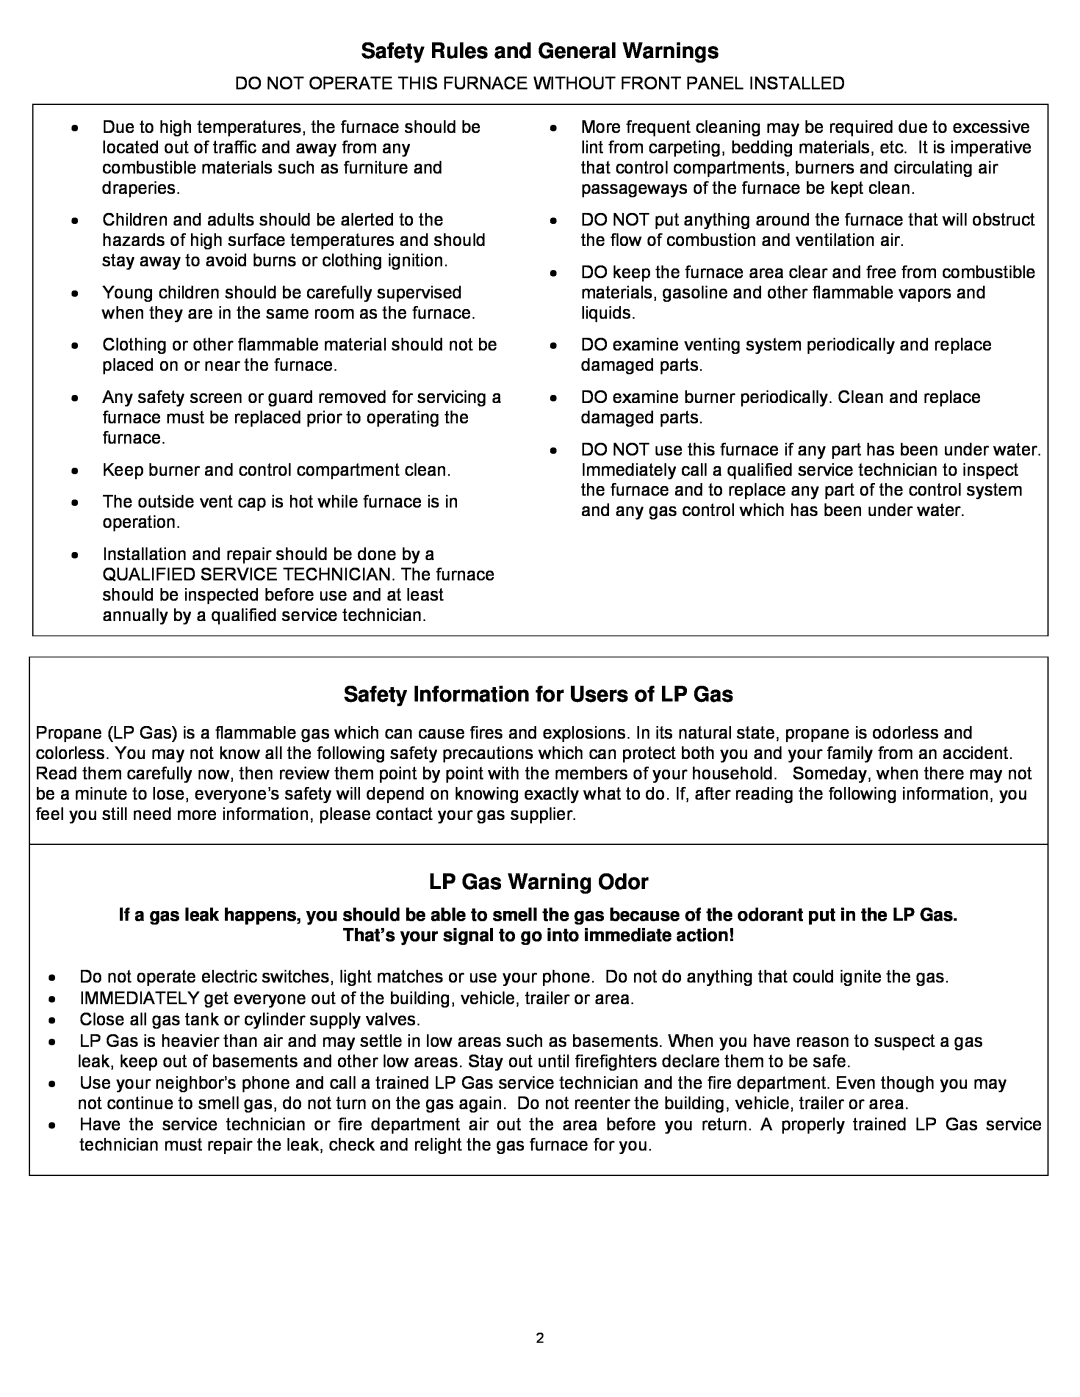 Williams 1773511, 1773512 Safety Rules and General Warnings, Safety Information for Users of LP Gas, LP Gas Warning Odor 